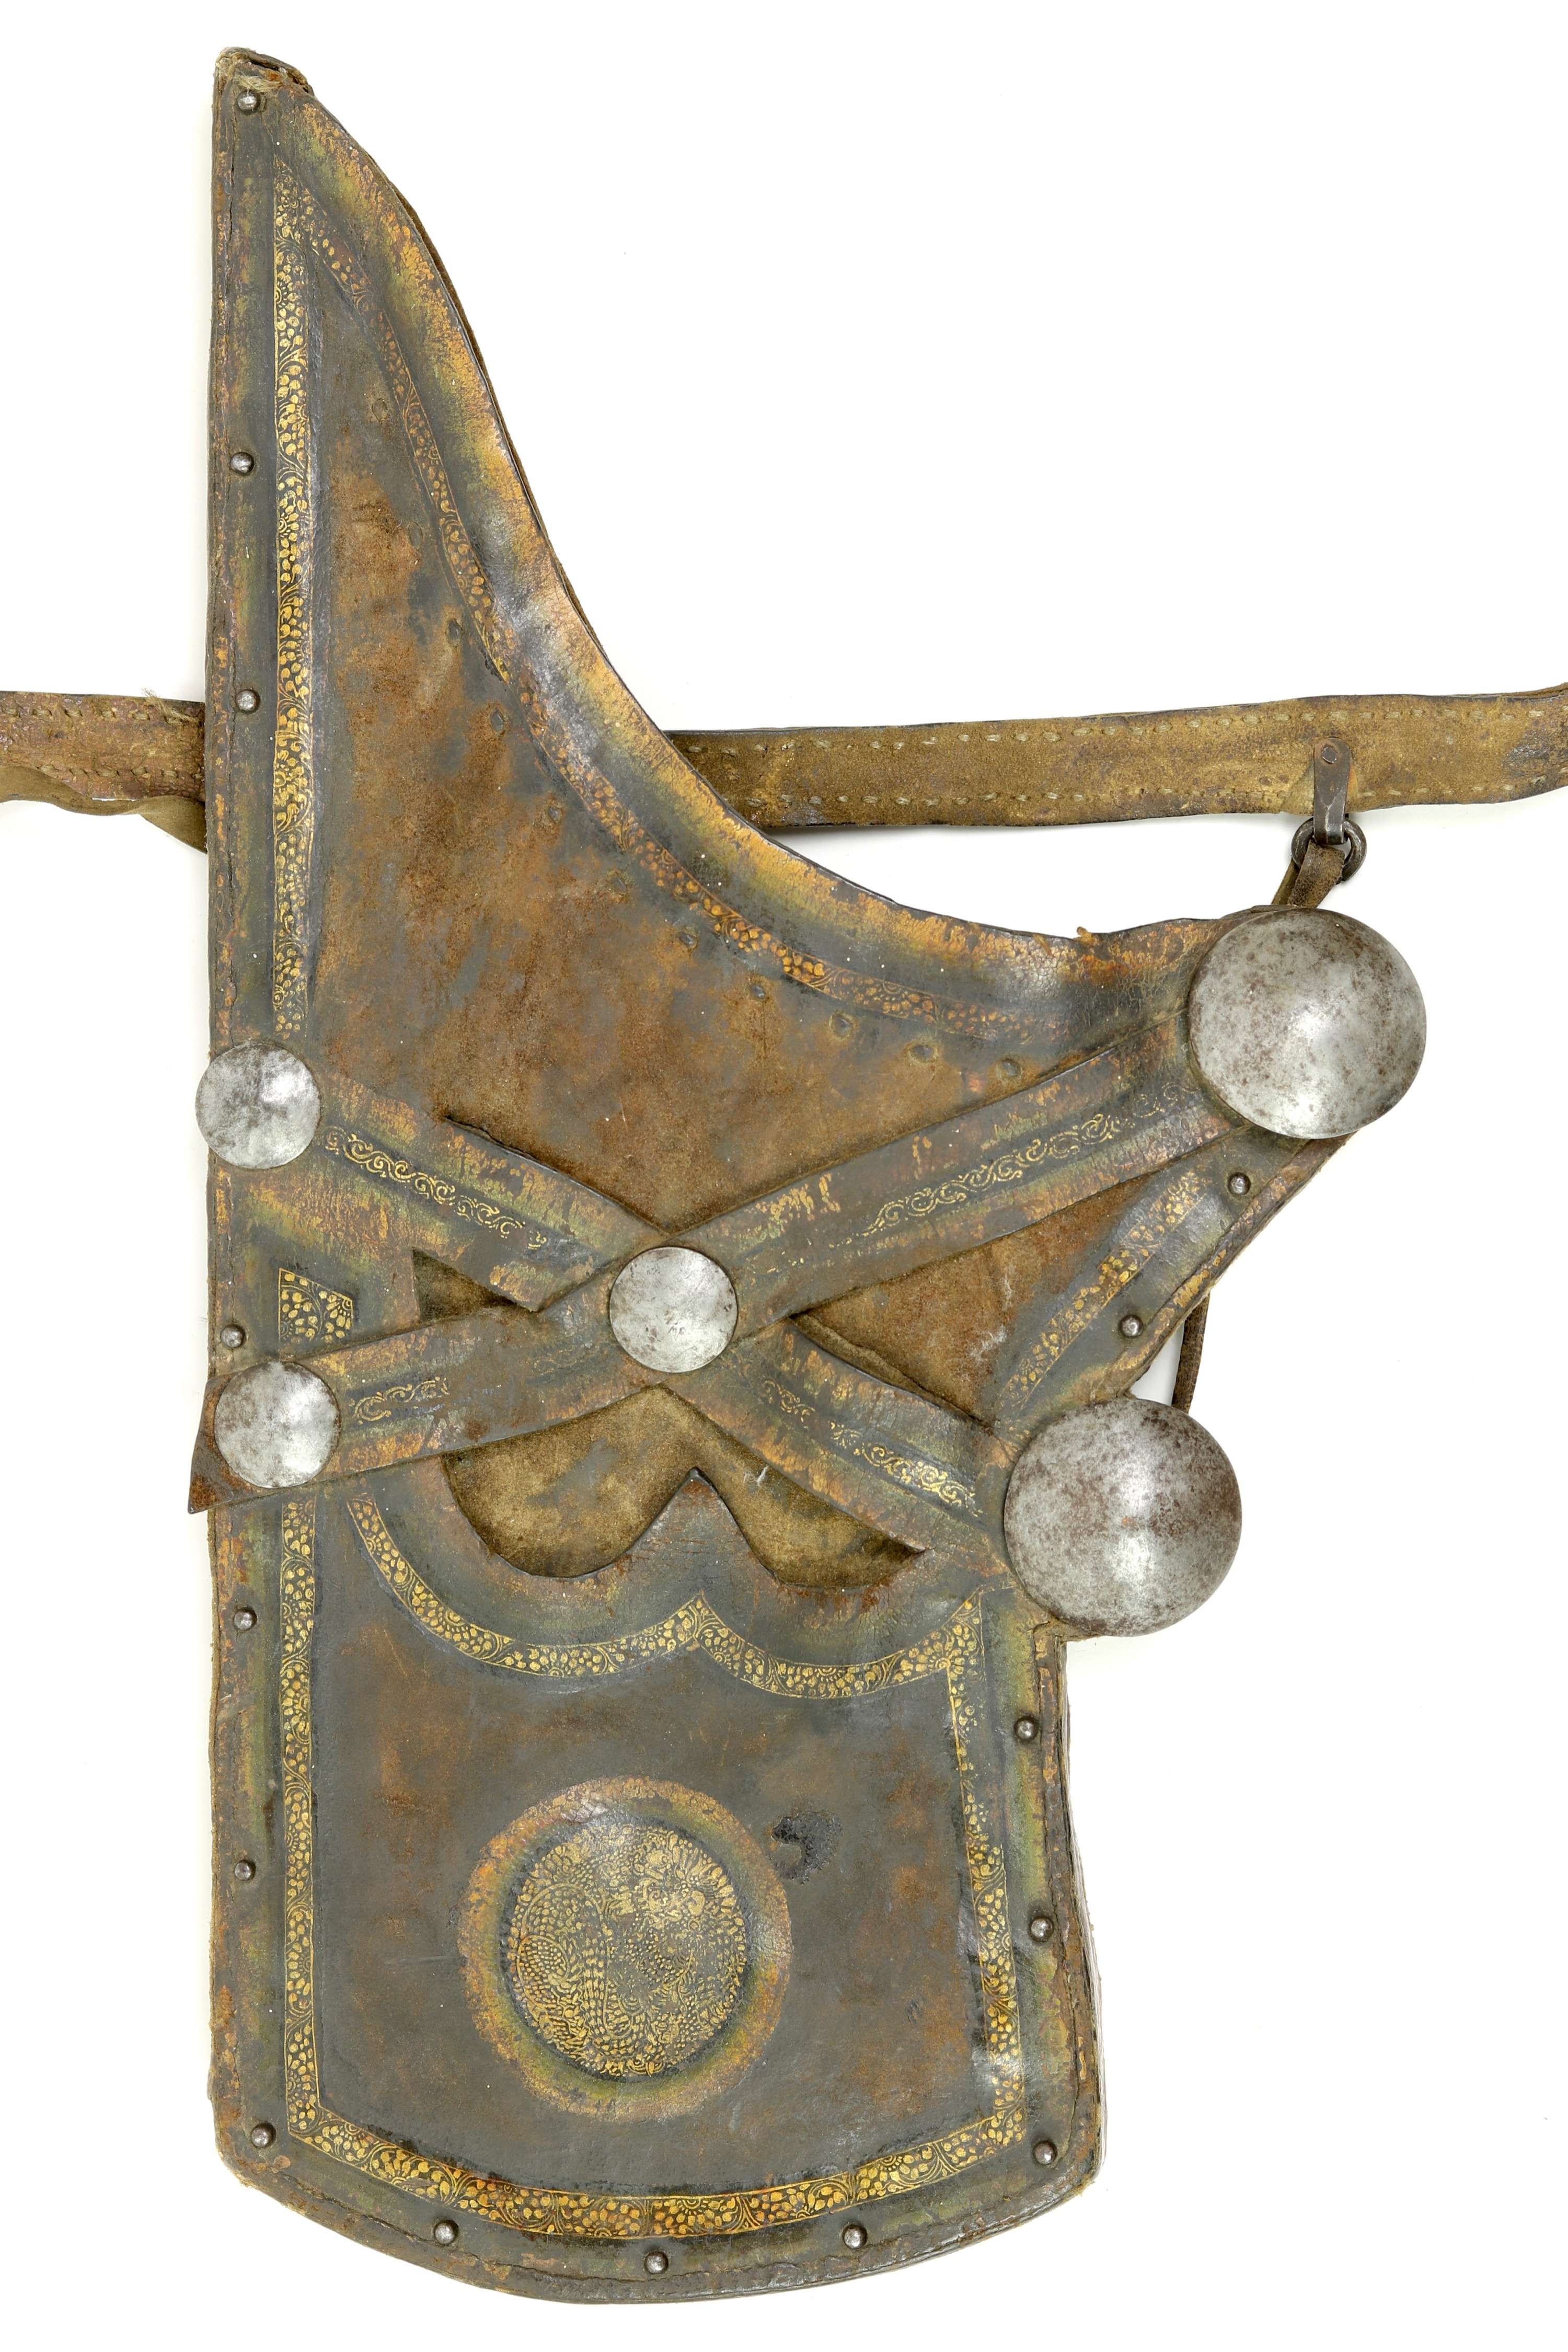 Tibetan or Mongolian quiver with belt